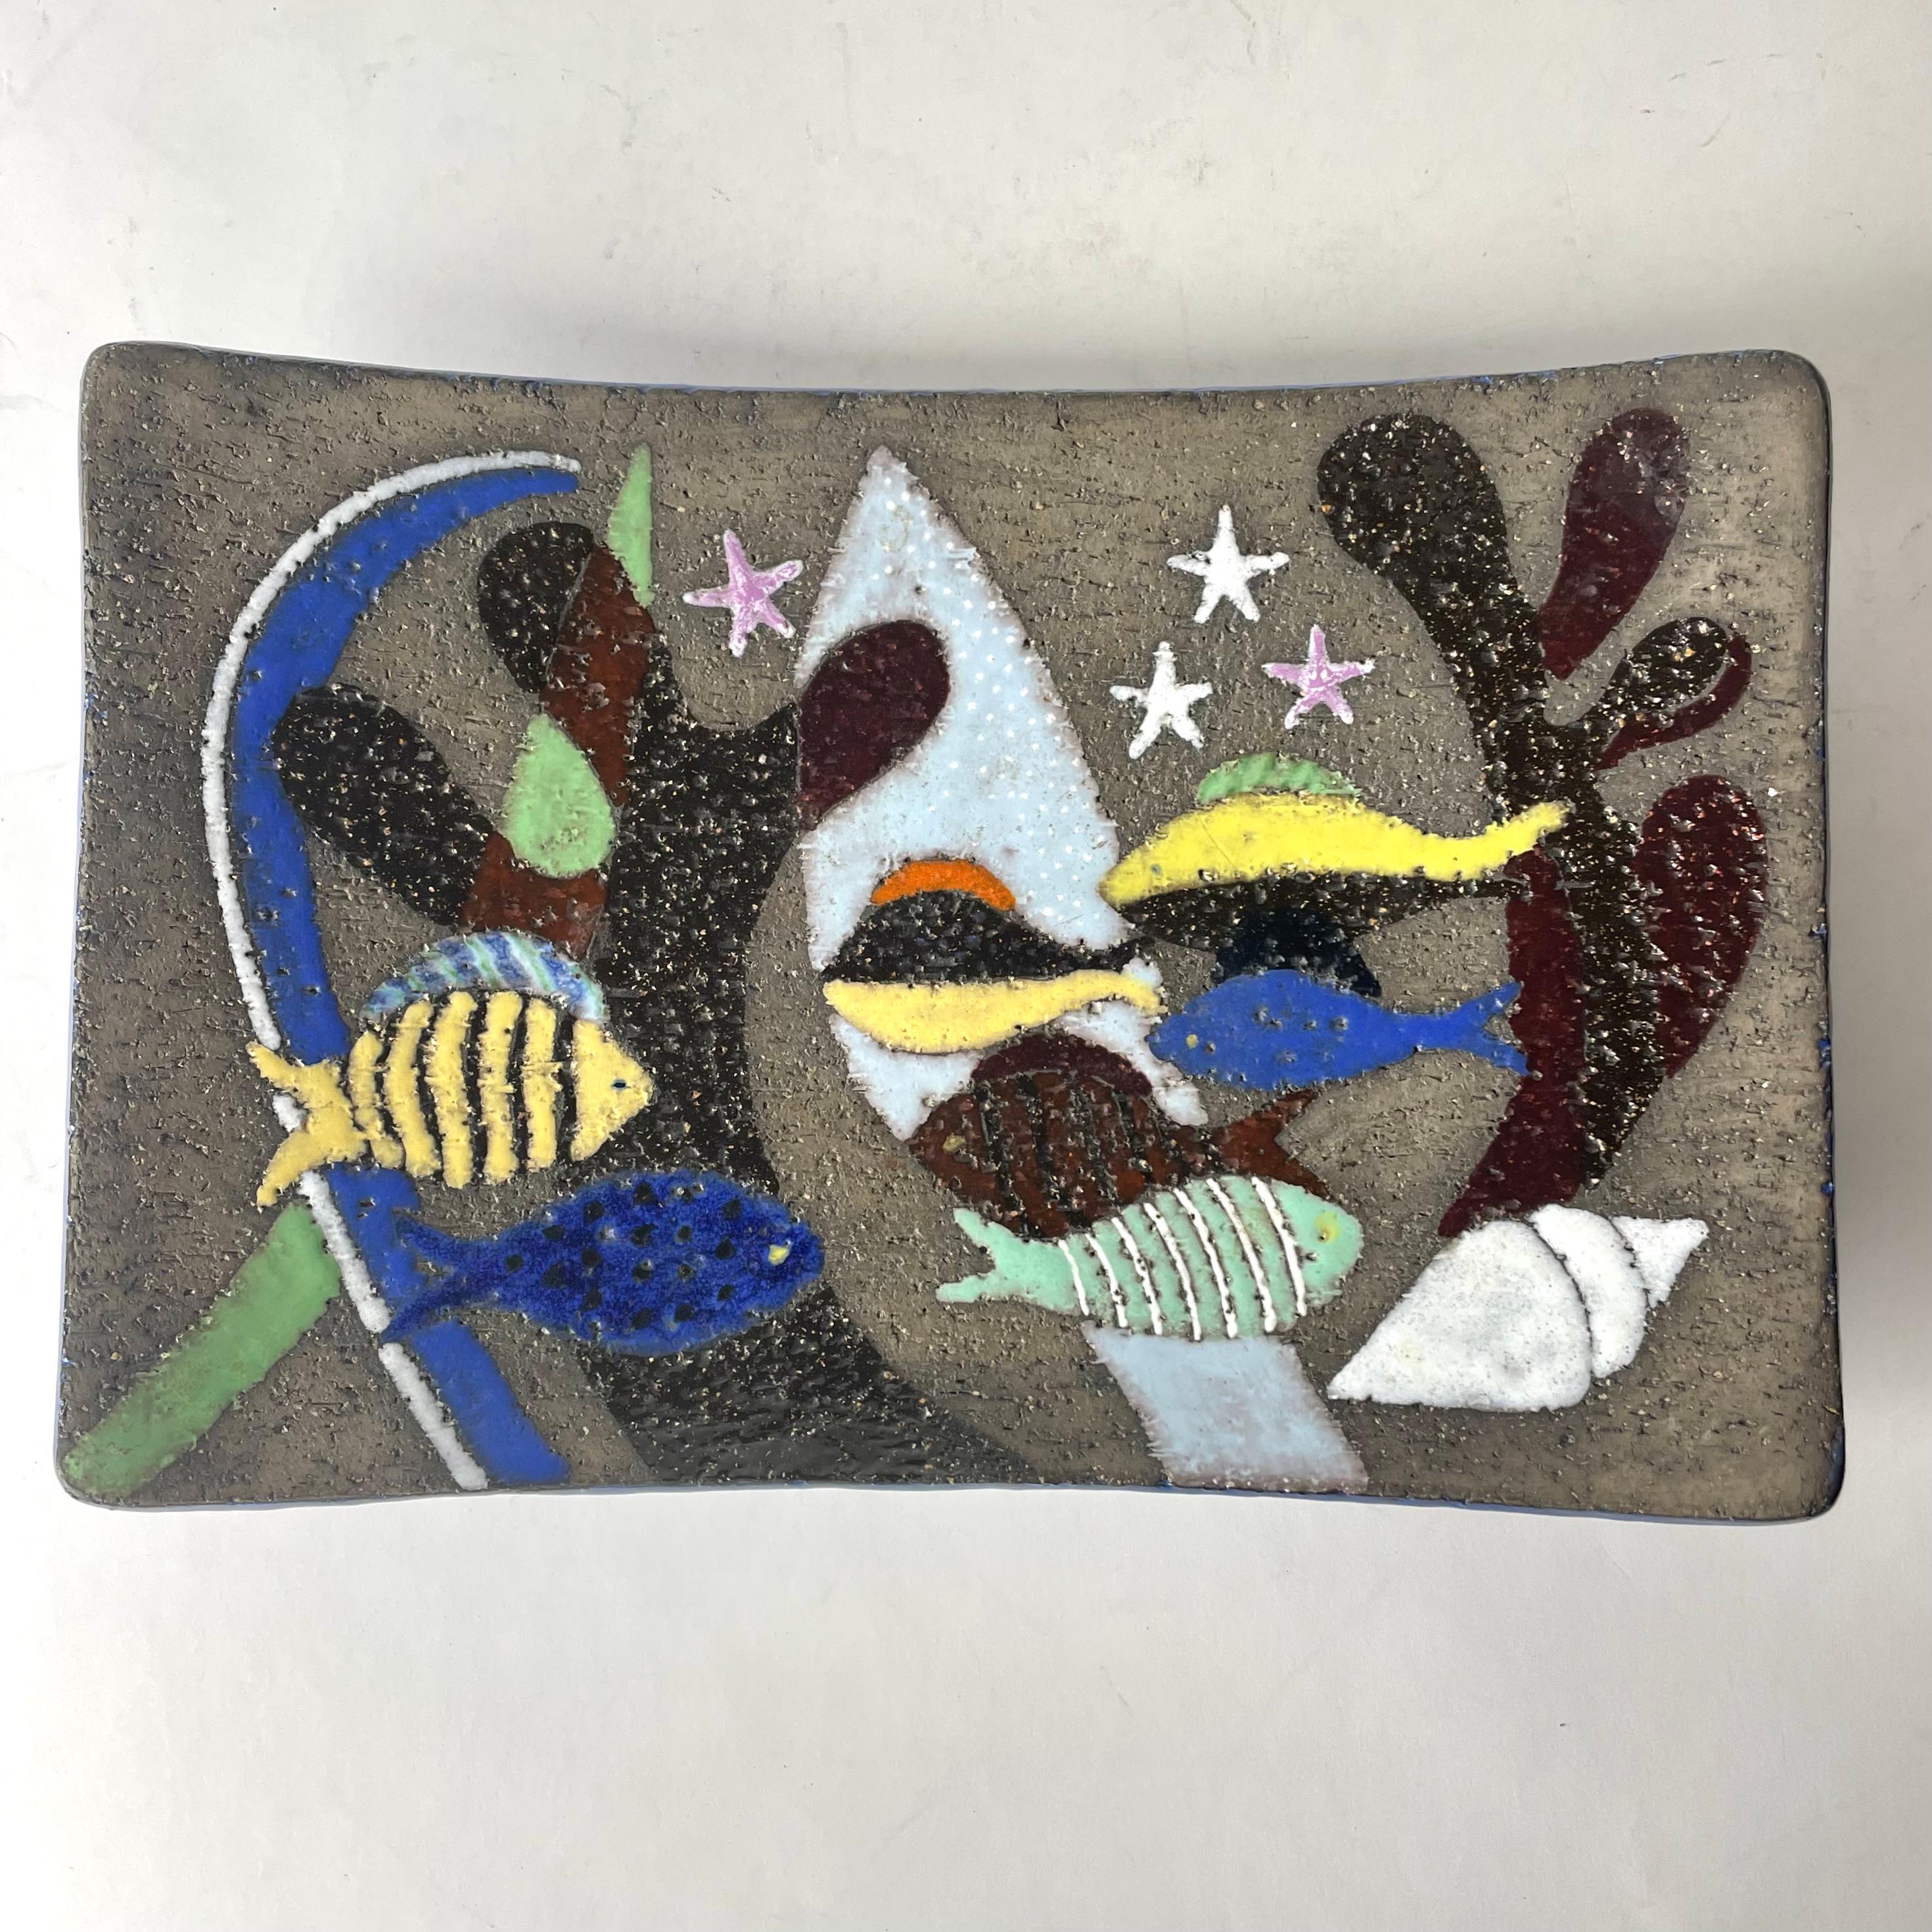 Decorative eartenware fruit platter by Anna-Lisa Thomson, Uppsala Ekeby, Sweden. Mid 20th Century. Beautifully decorated with fishes in various colors from late 1940s or early 1950s

Wear consistent with age and use 